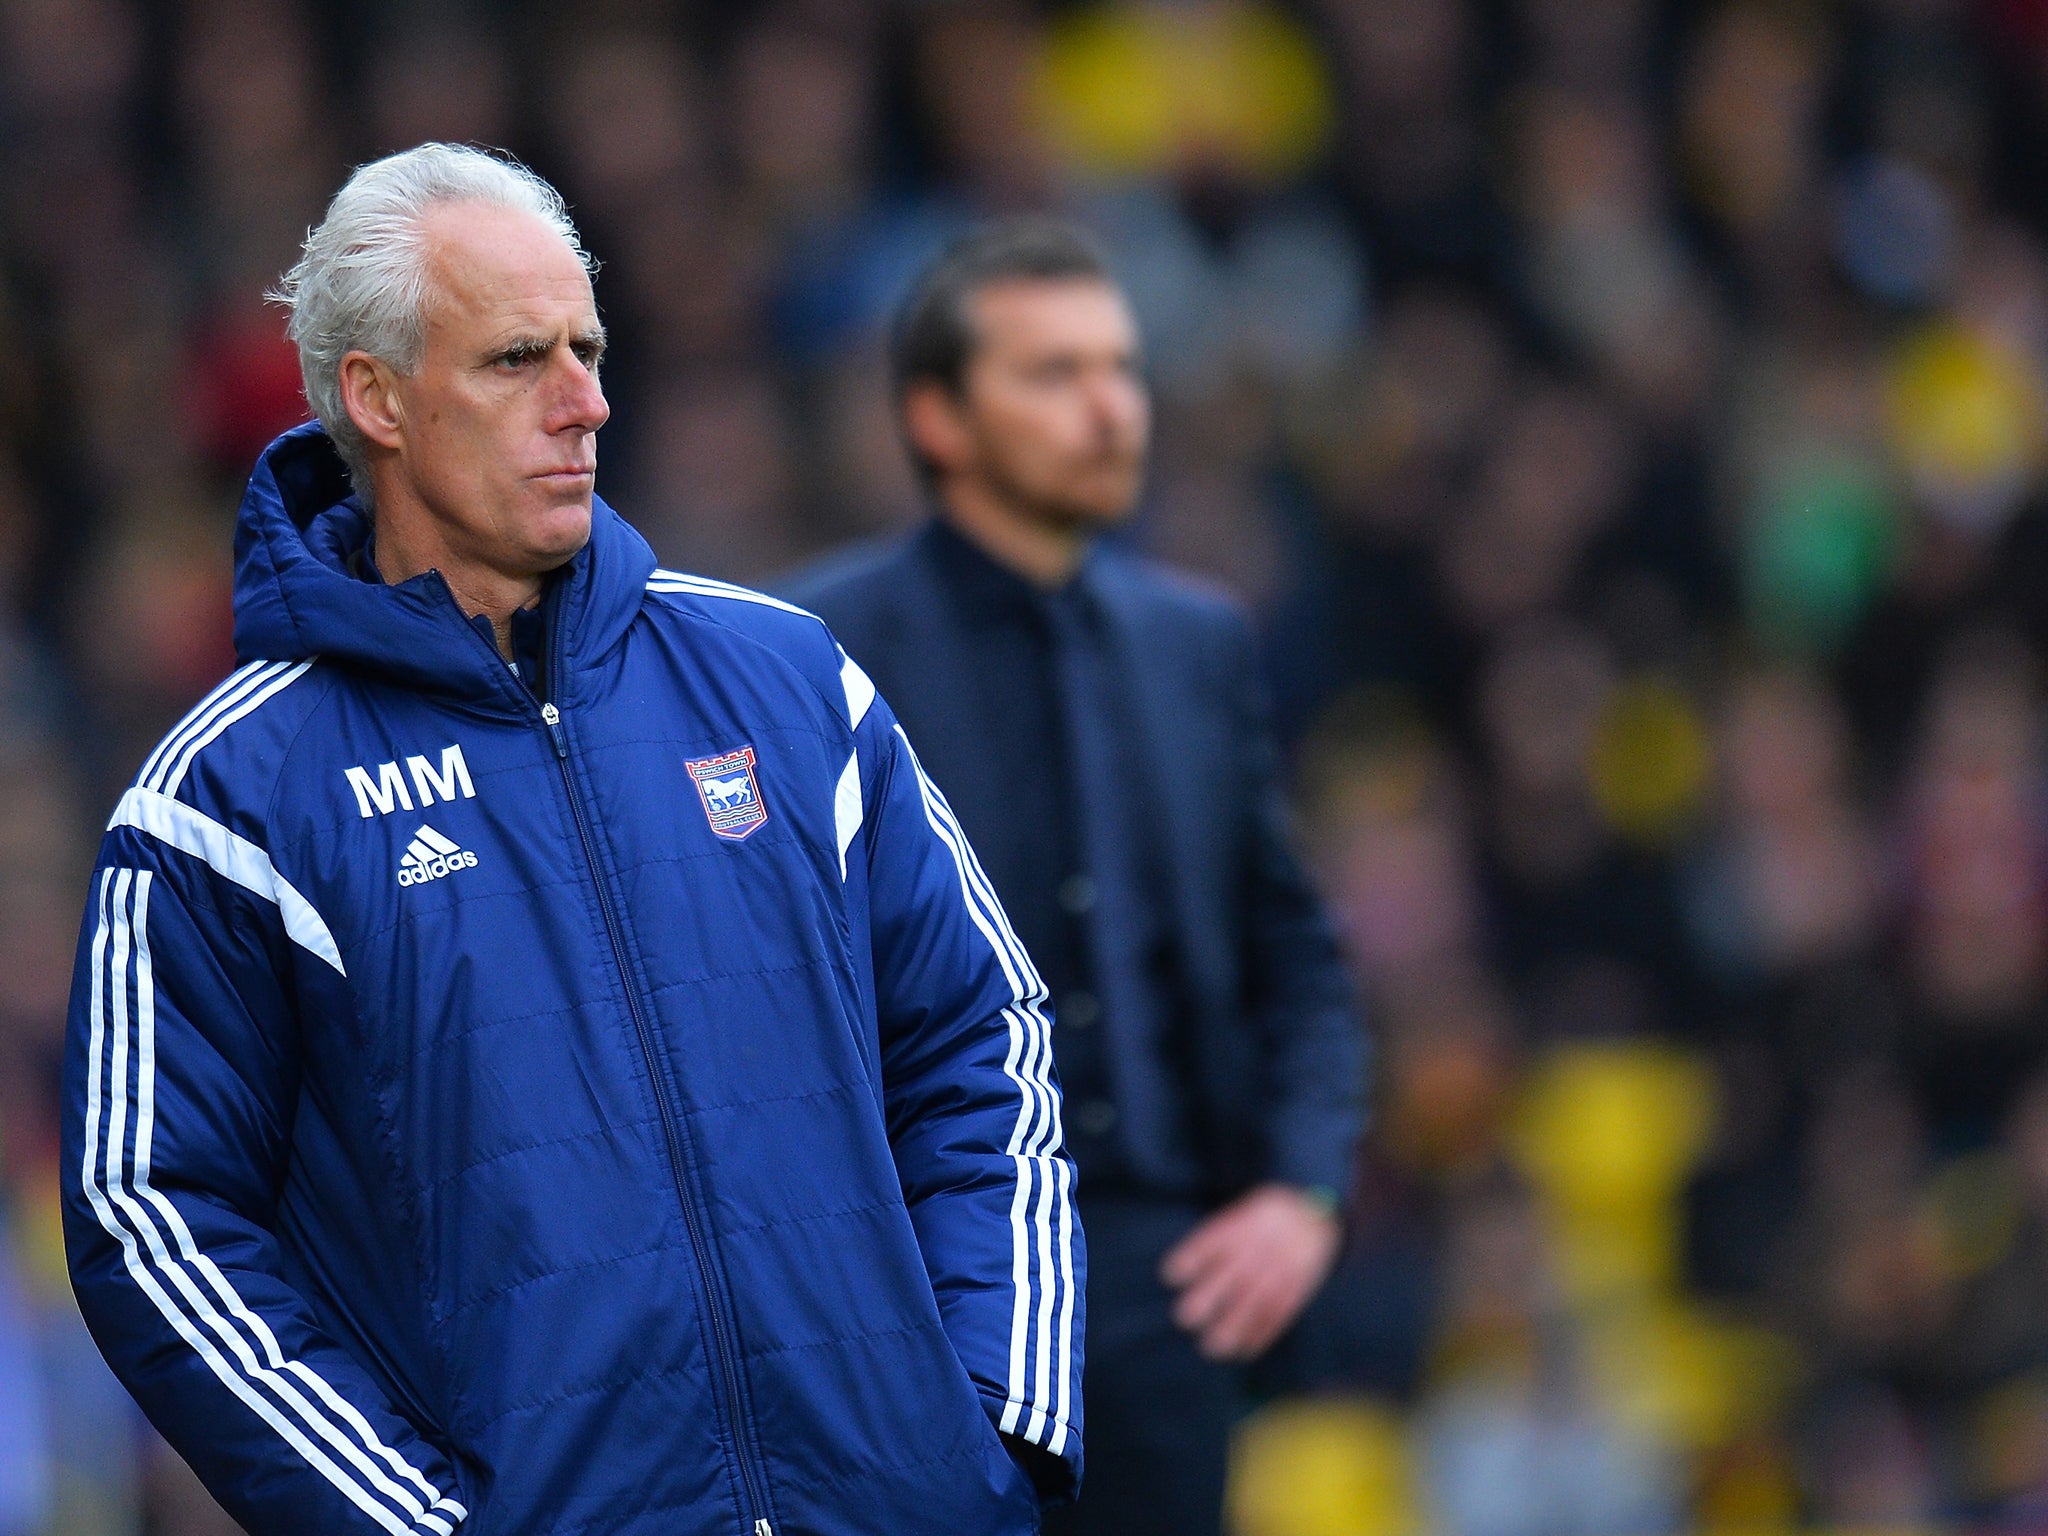 &#13;
Mick McCarthy is the longest-serving manager in the division &#13;